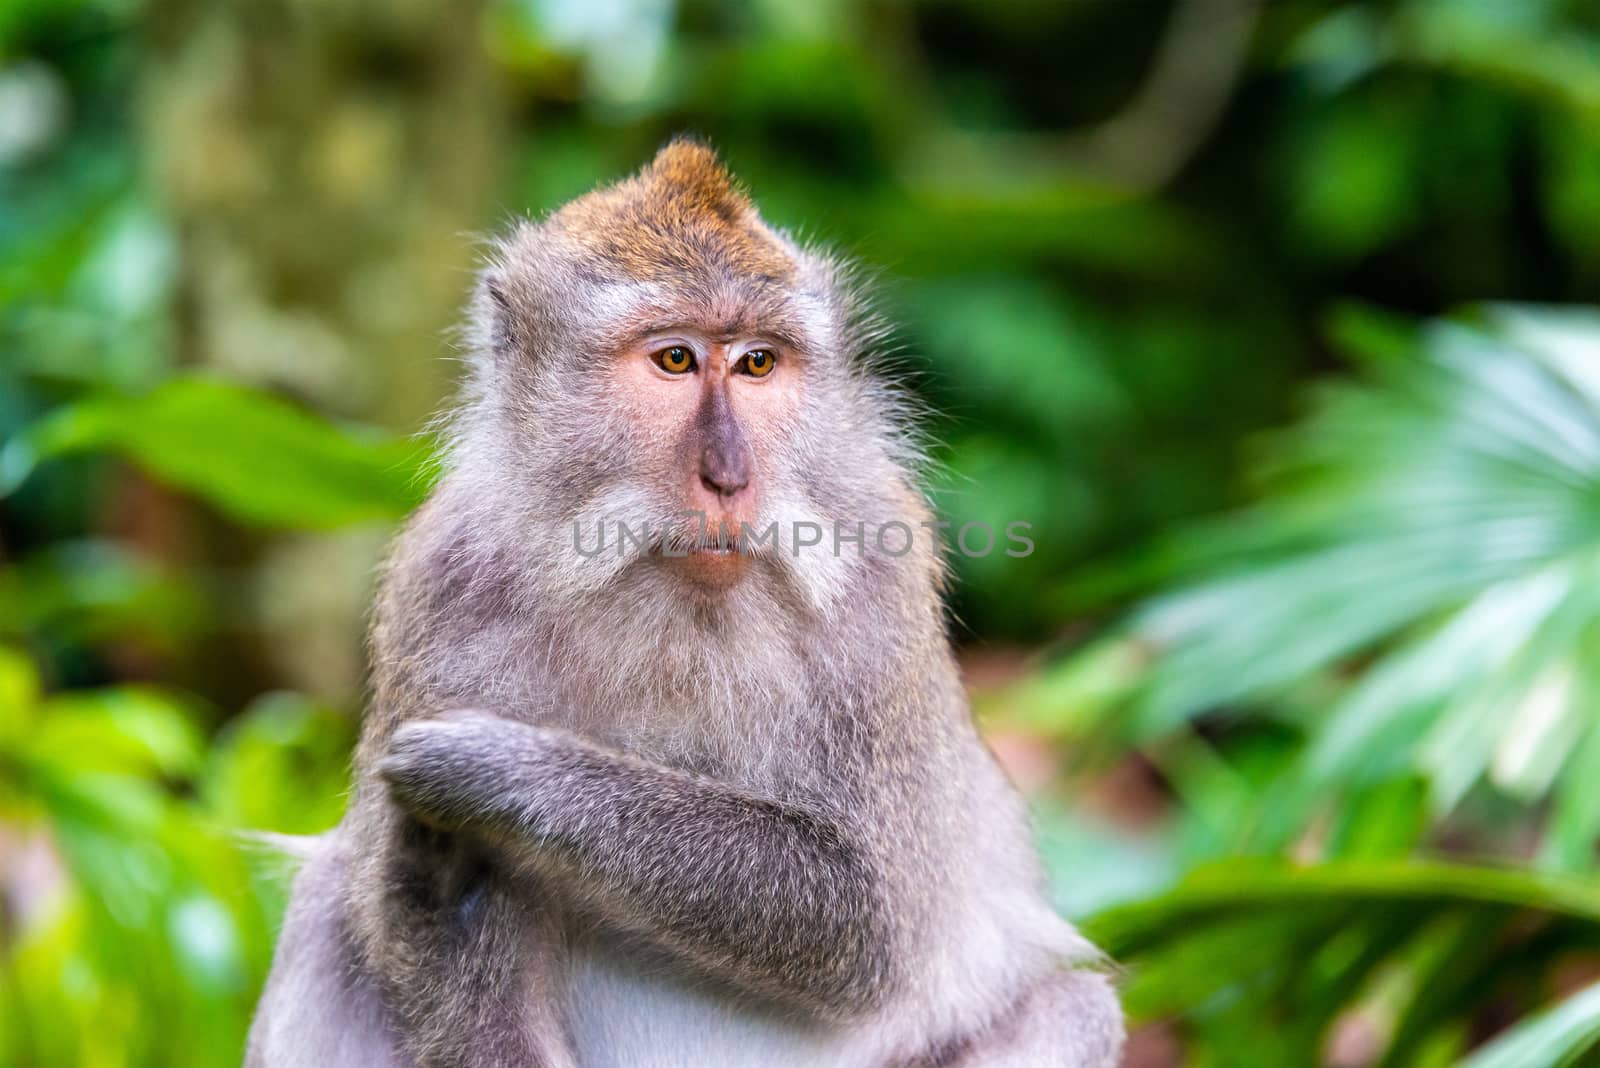 Macaque monkey at Ubud Monkey Forest in Bali by dutourdumonde